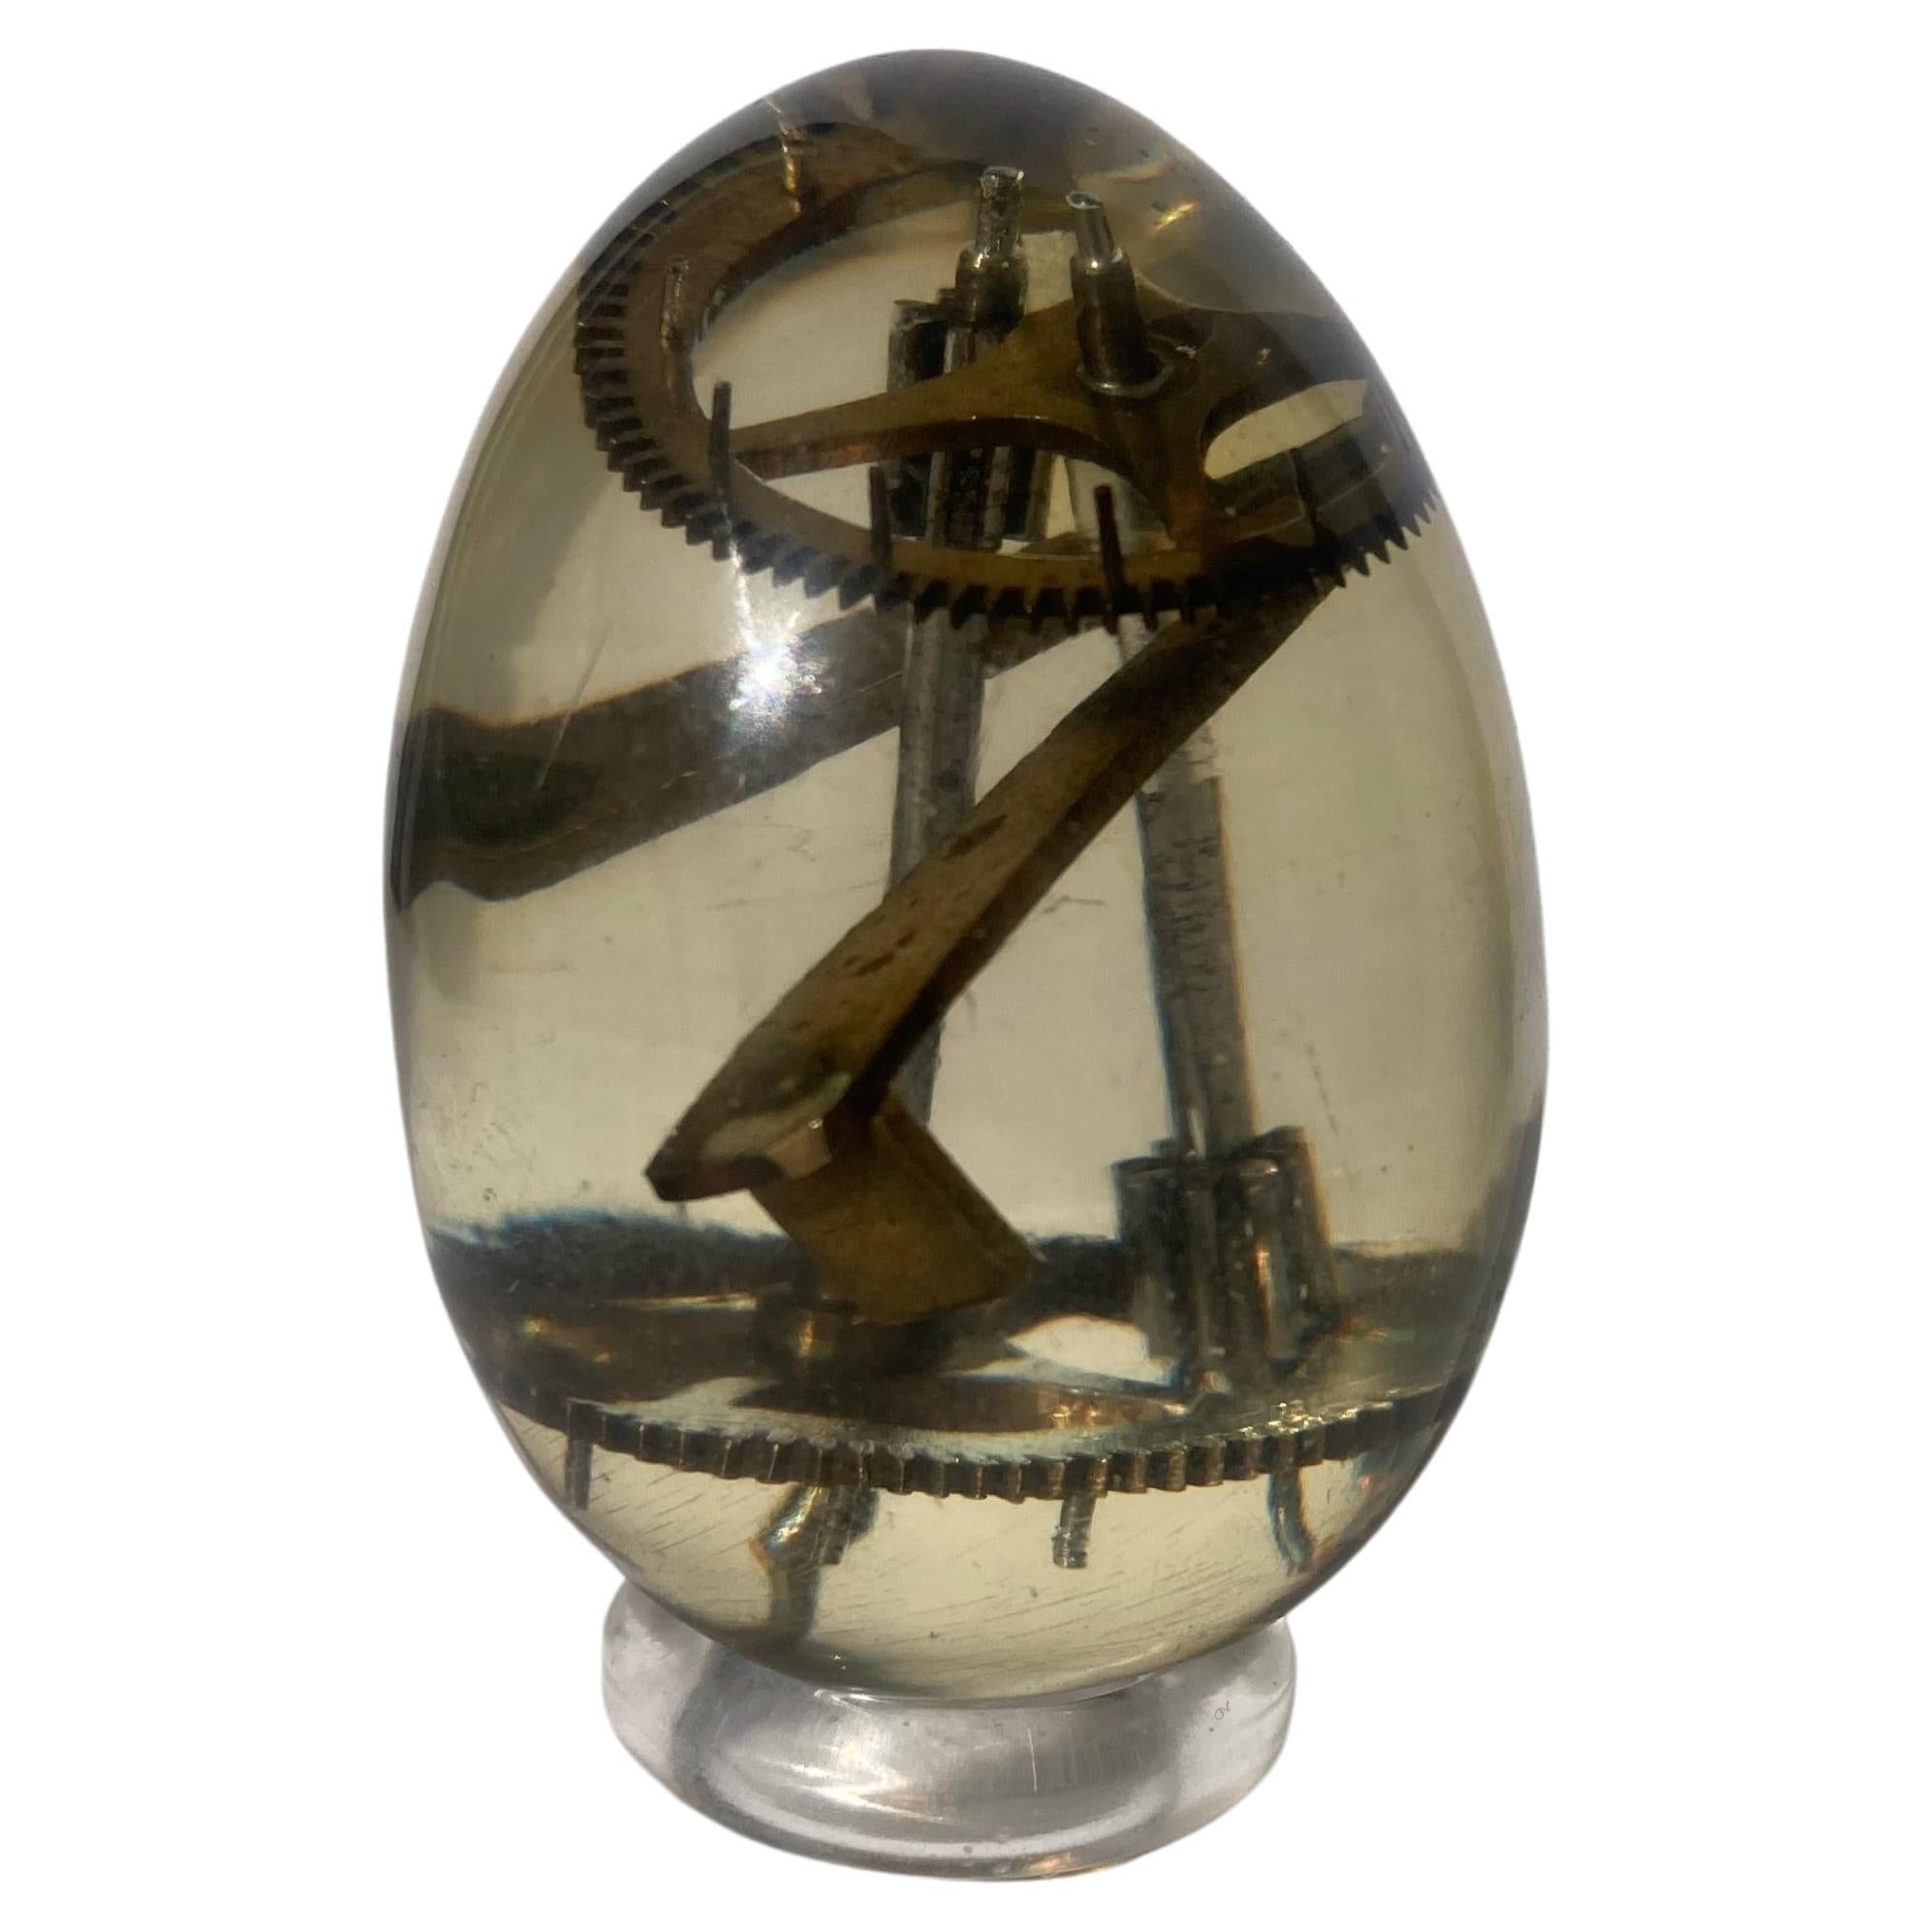 Resin Egg with Clock Parts on Pierre GIRAUDON  Sculpture /Ornament / Paperweight